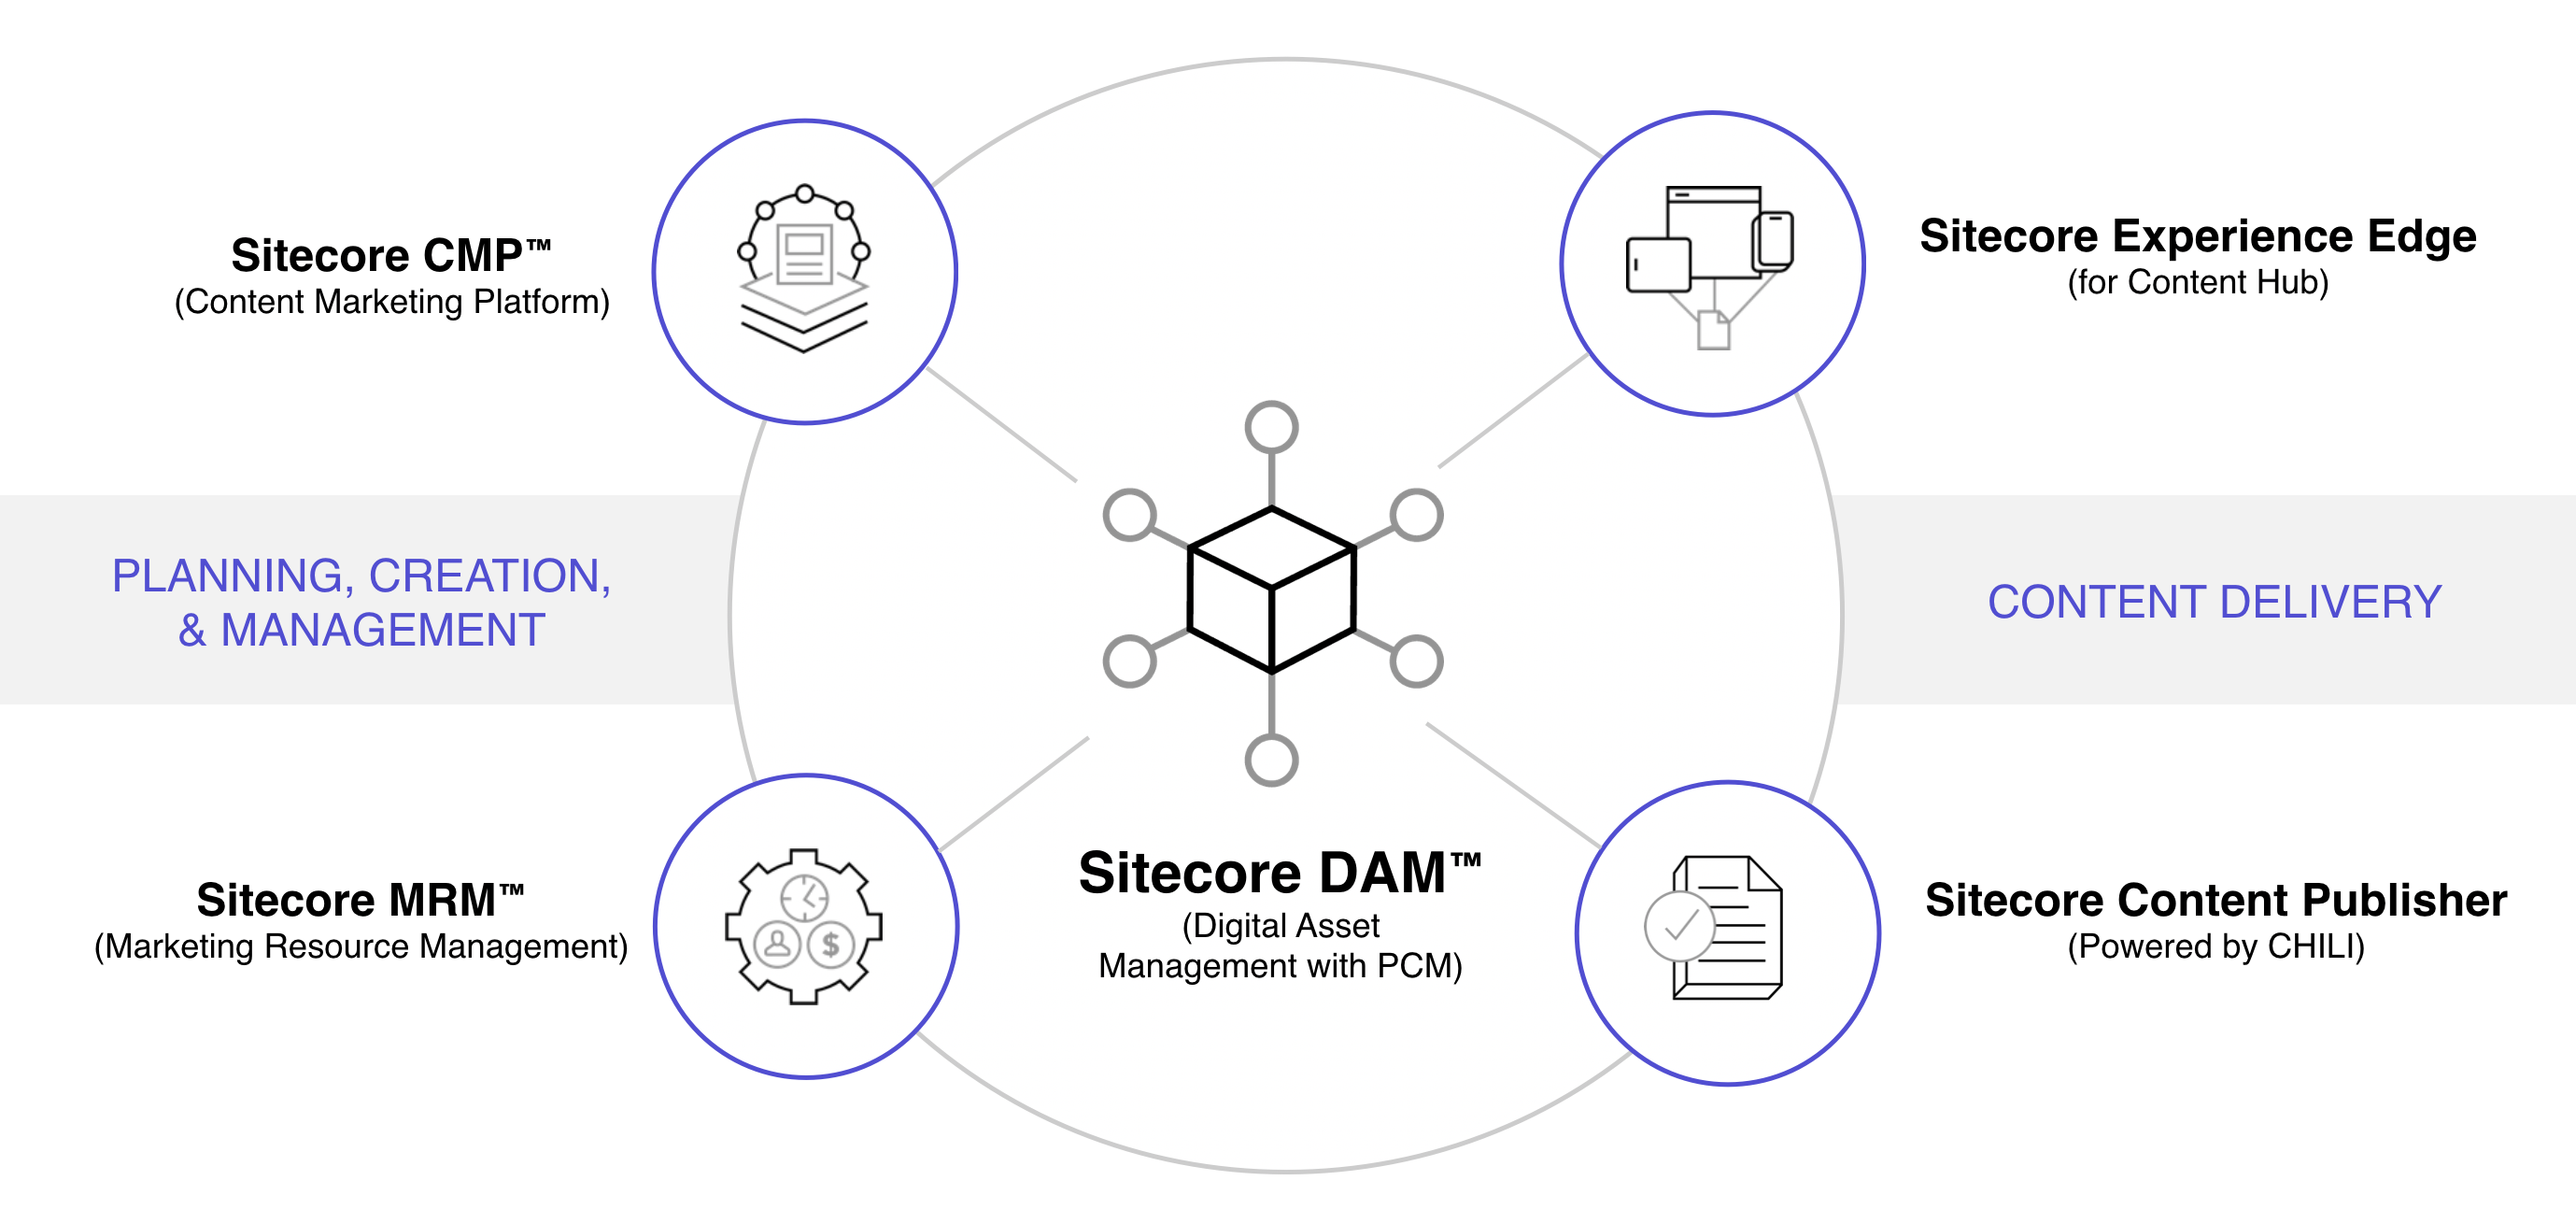 Components of Sitecore Content Hub DAM include CMP, MRM, Experience Edge, and Content Publisher (CHILI).